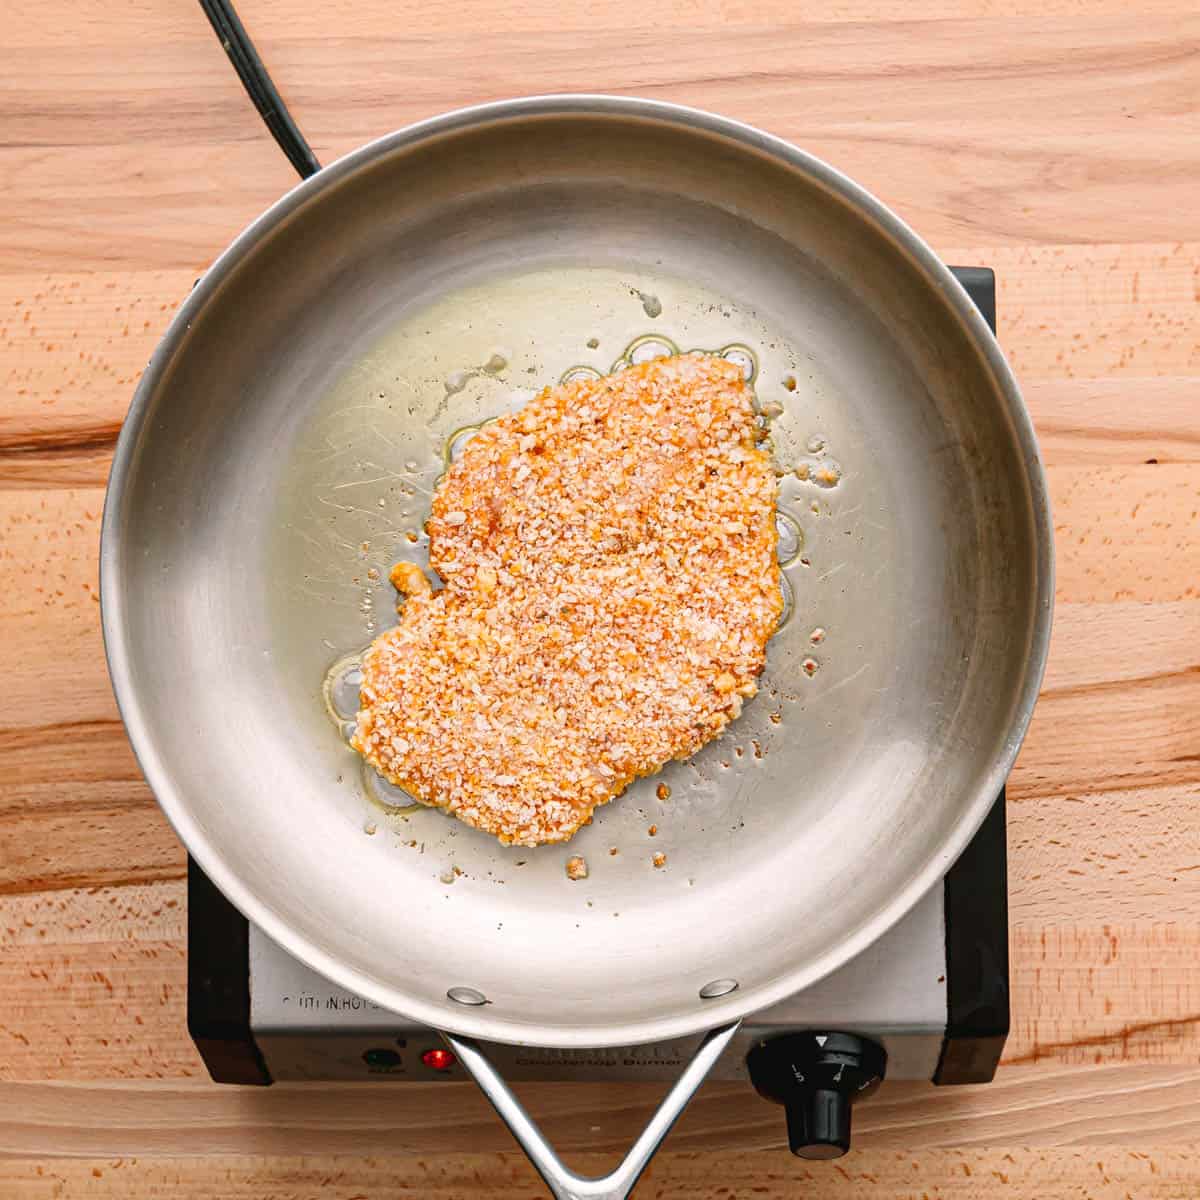 cook the chicken cutlets for about 2 minutes or longer per side, until crispy and golden brown. 